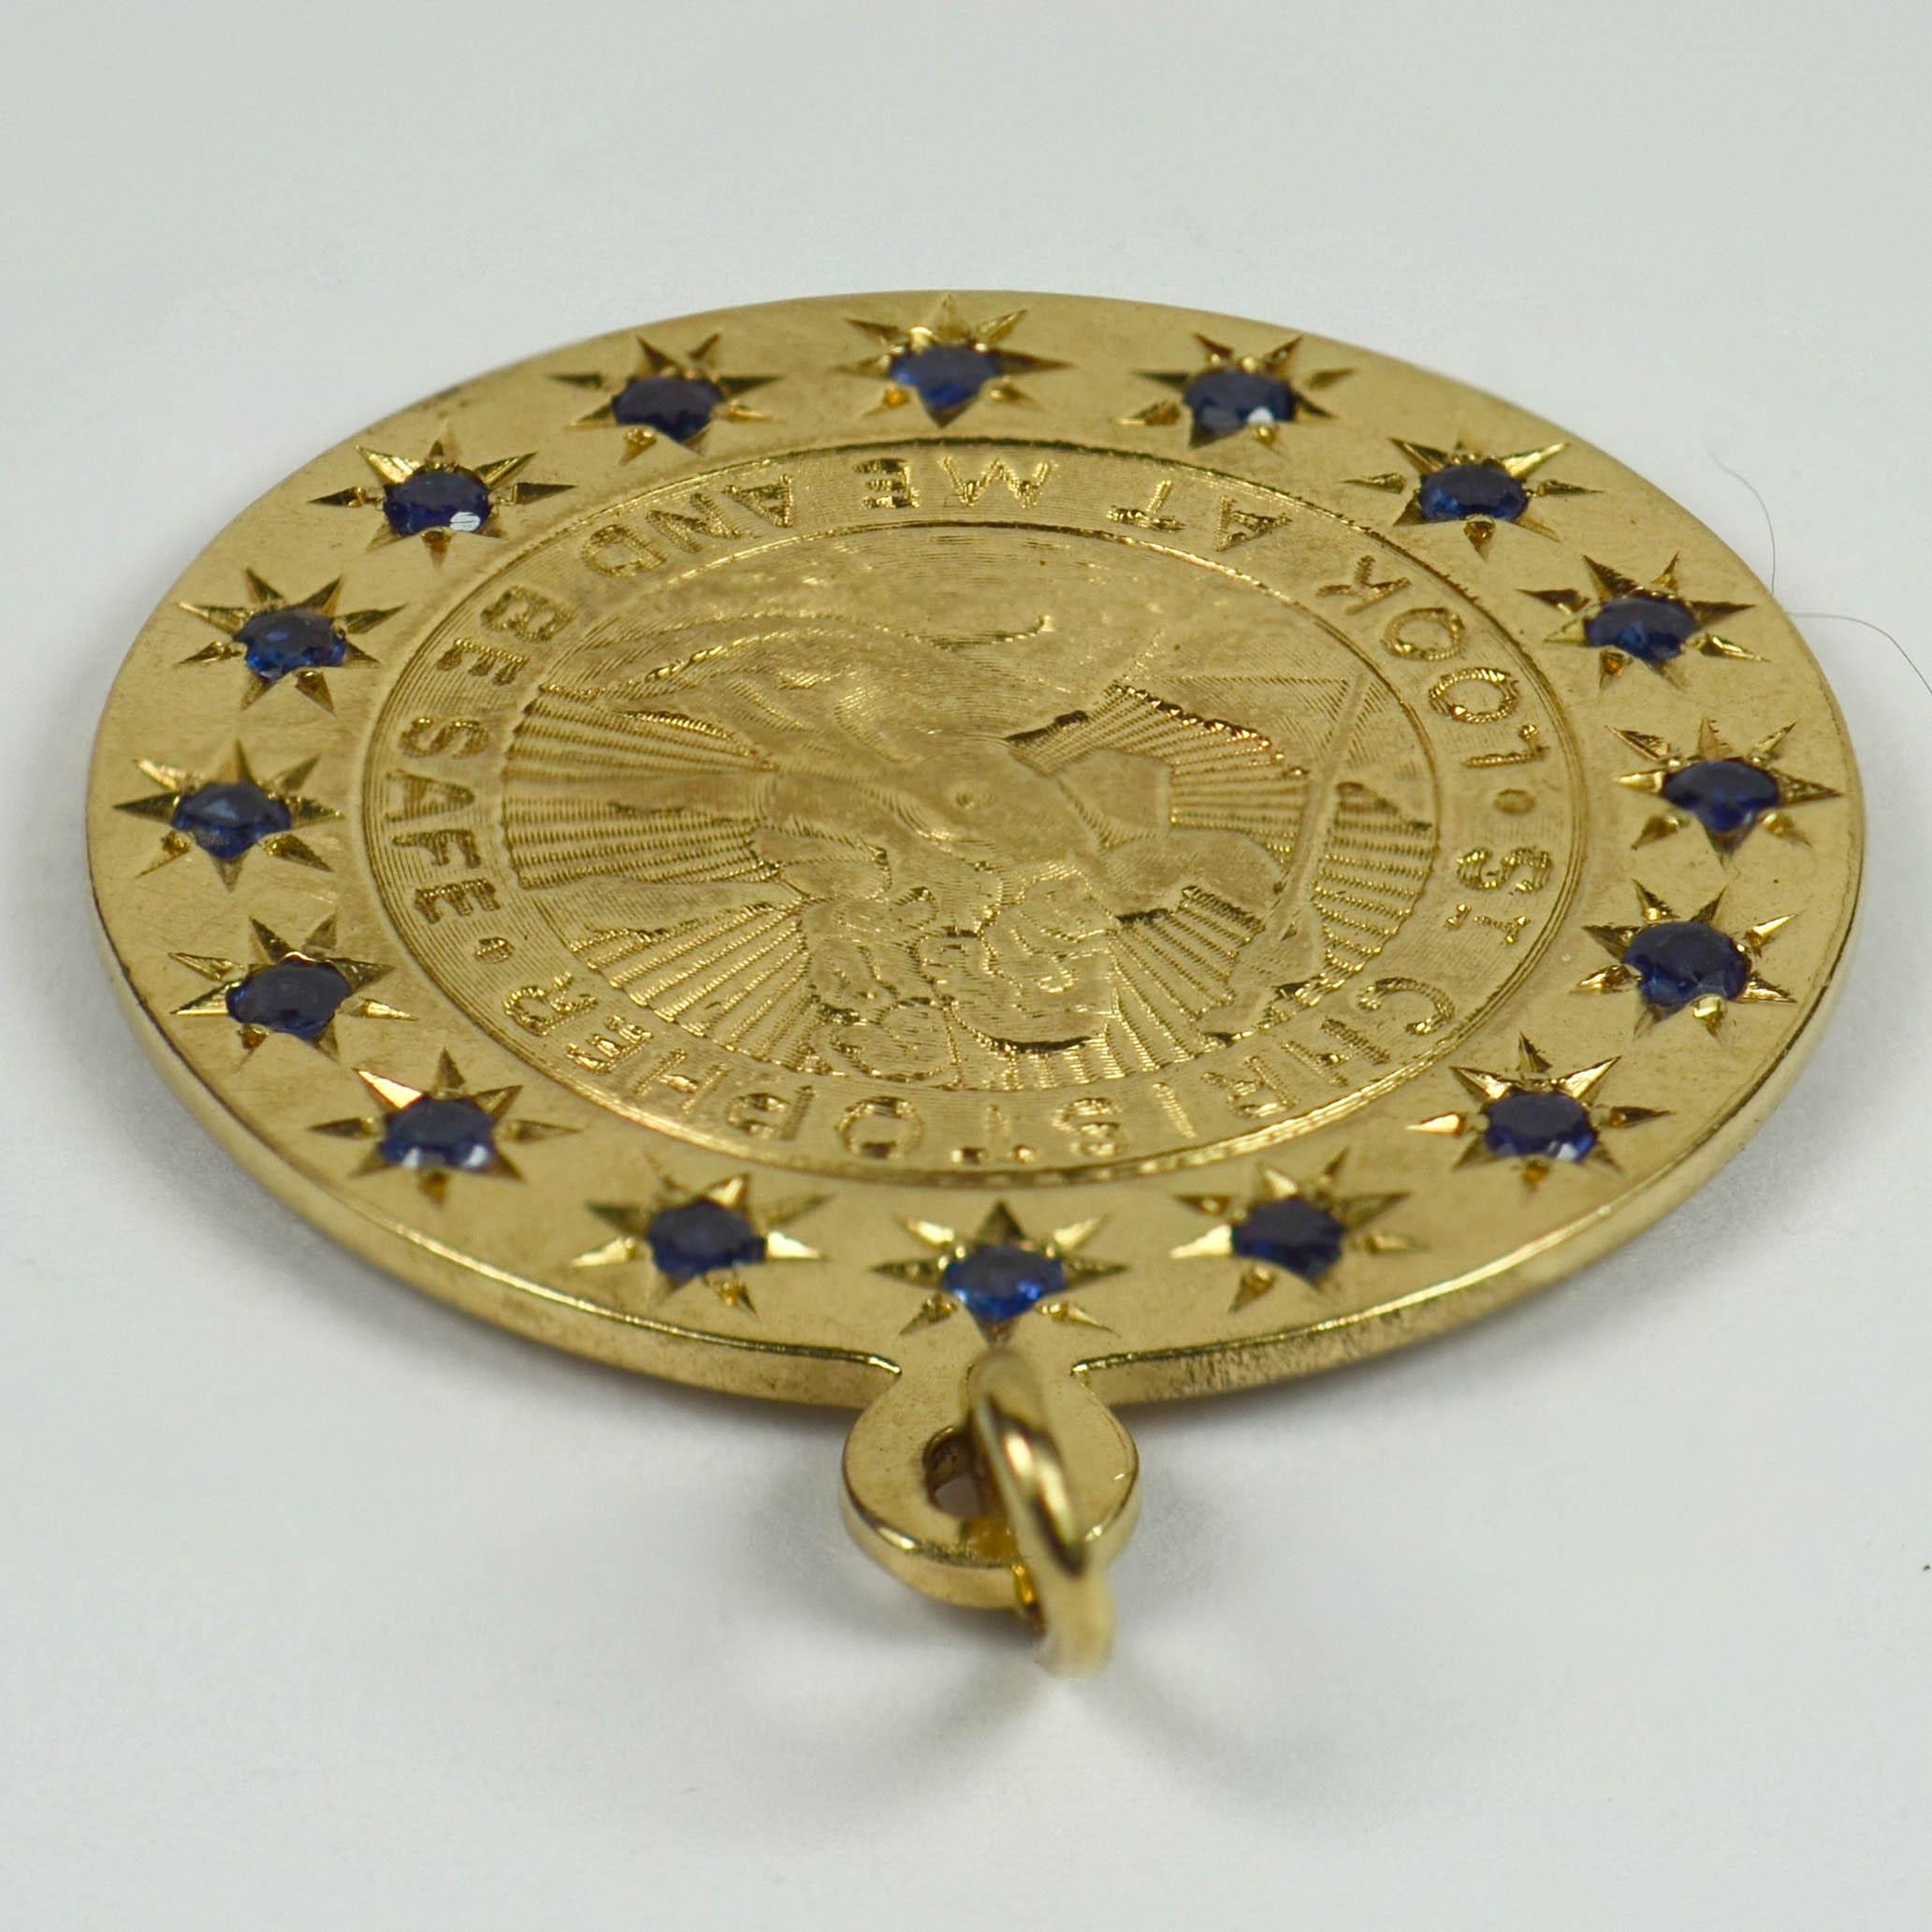 A 14 karat yellow gold charm pendant designed as a medallion depicting St Christopher carrying the infant Christ across a river surrounded by 16 blue sapphires in star settings. The pendant is engraved with the phrase 